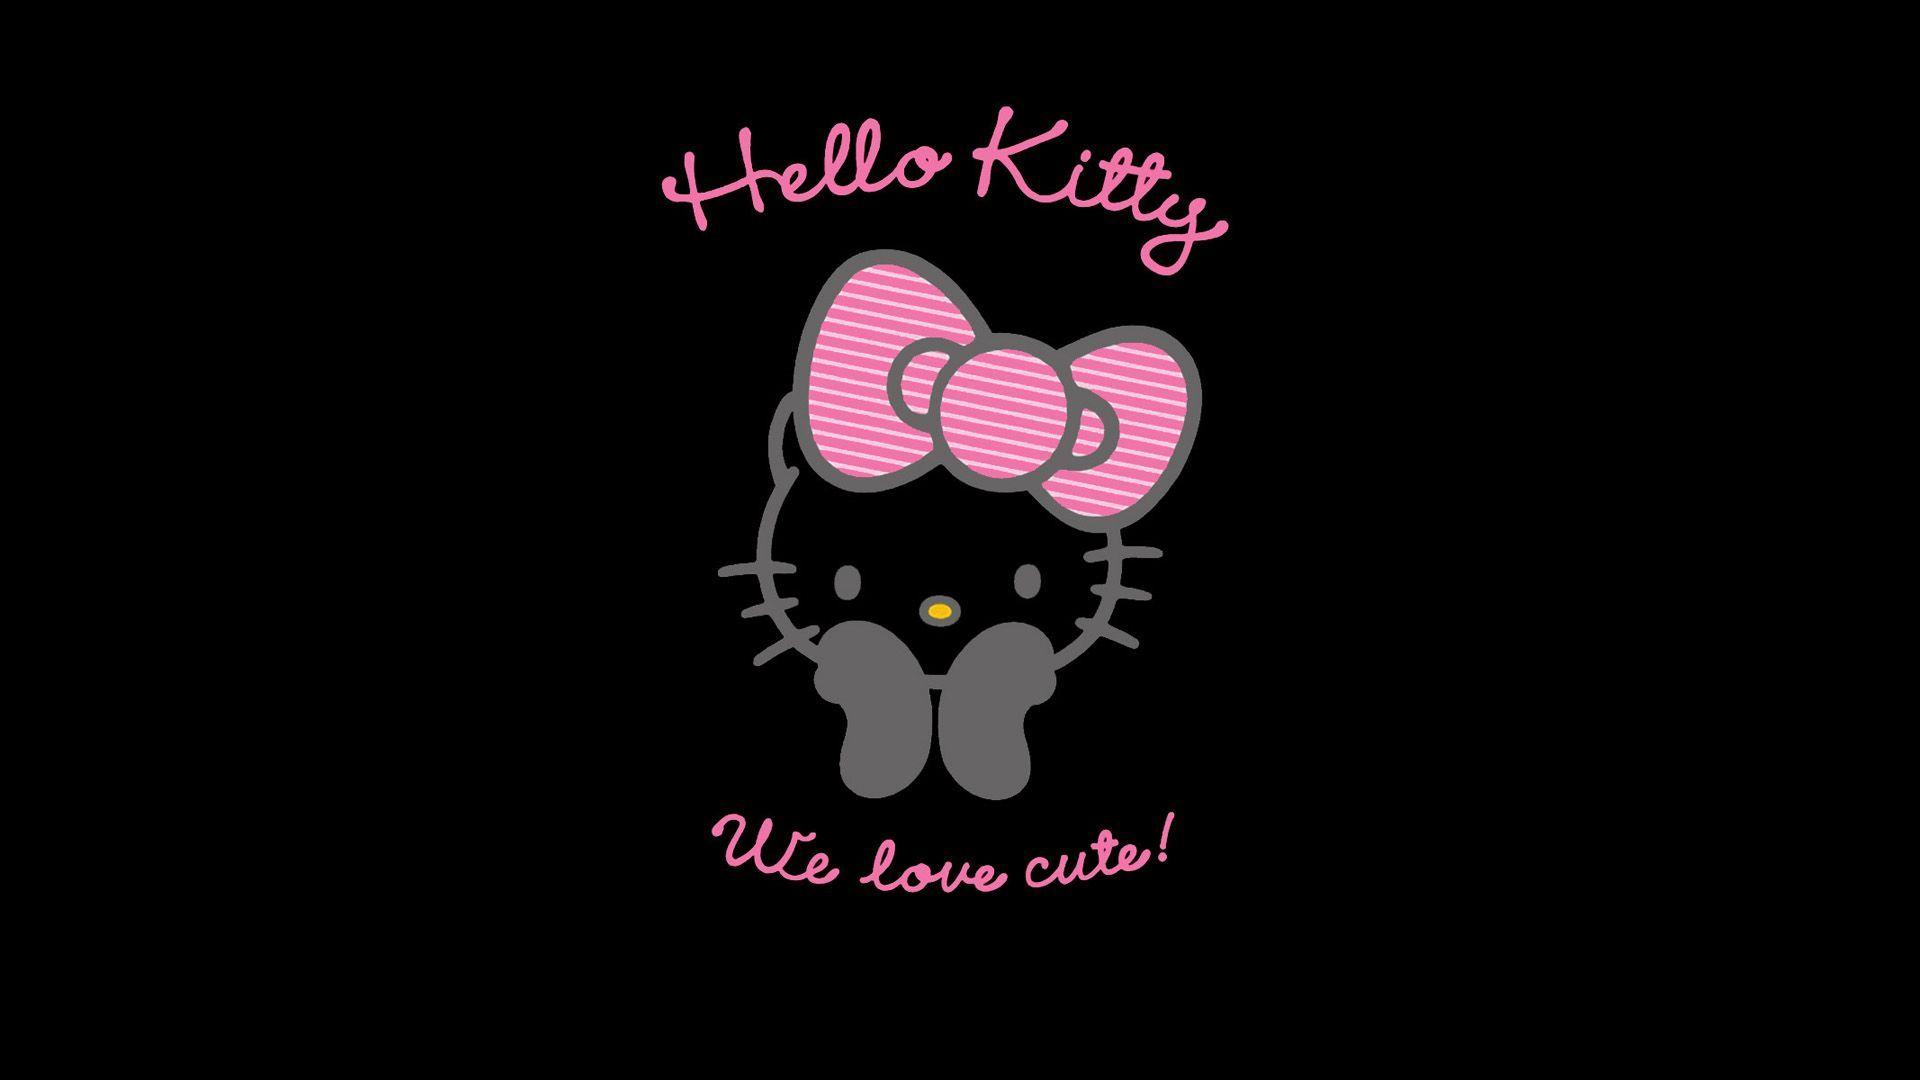 Download Wallpaper Hello Kitty 3d Image Num 54